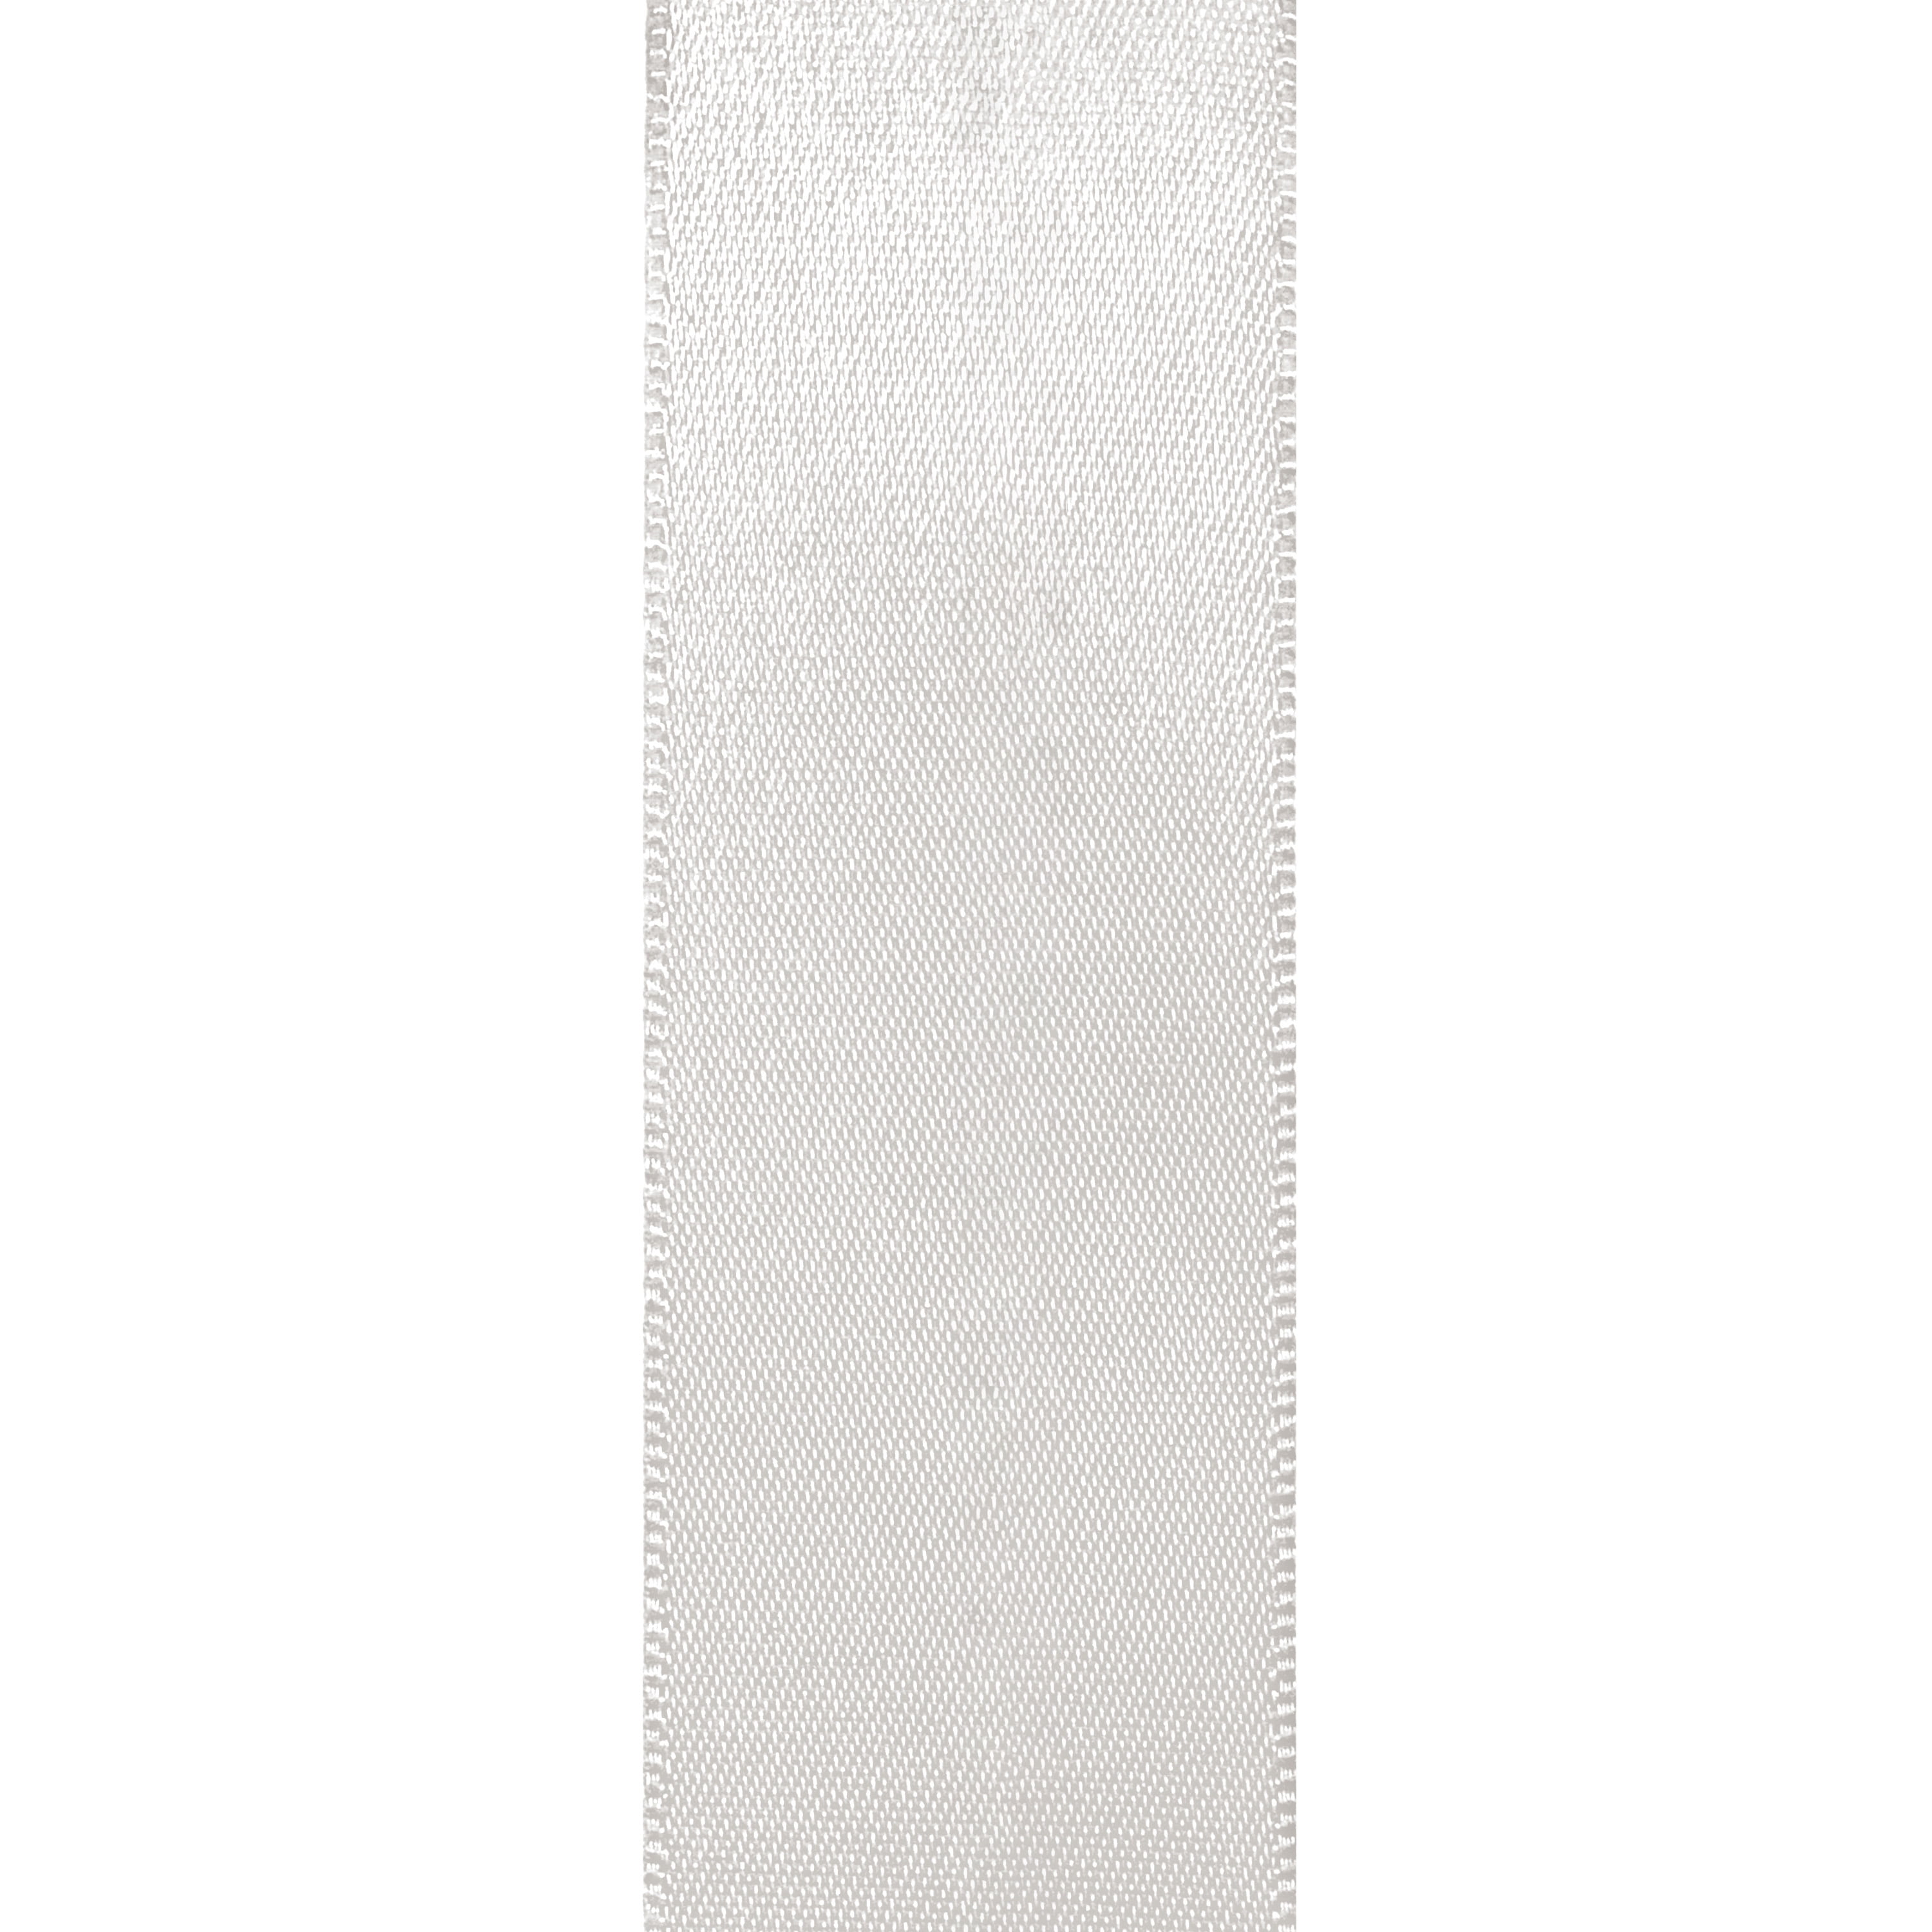 Double Face Swiss Satin Ribbon, White, 1 1/2 Inch, 27-YDS, Woven Edge